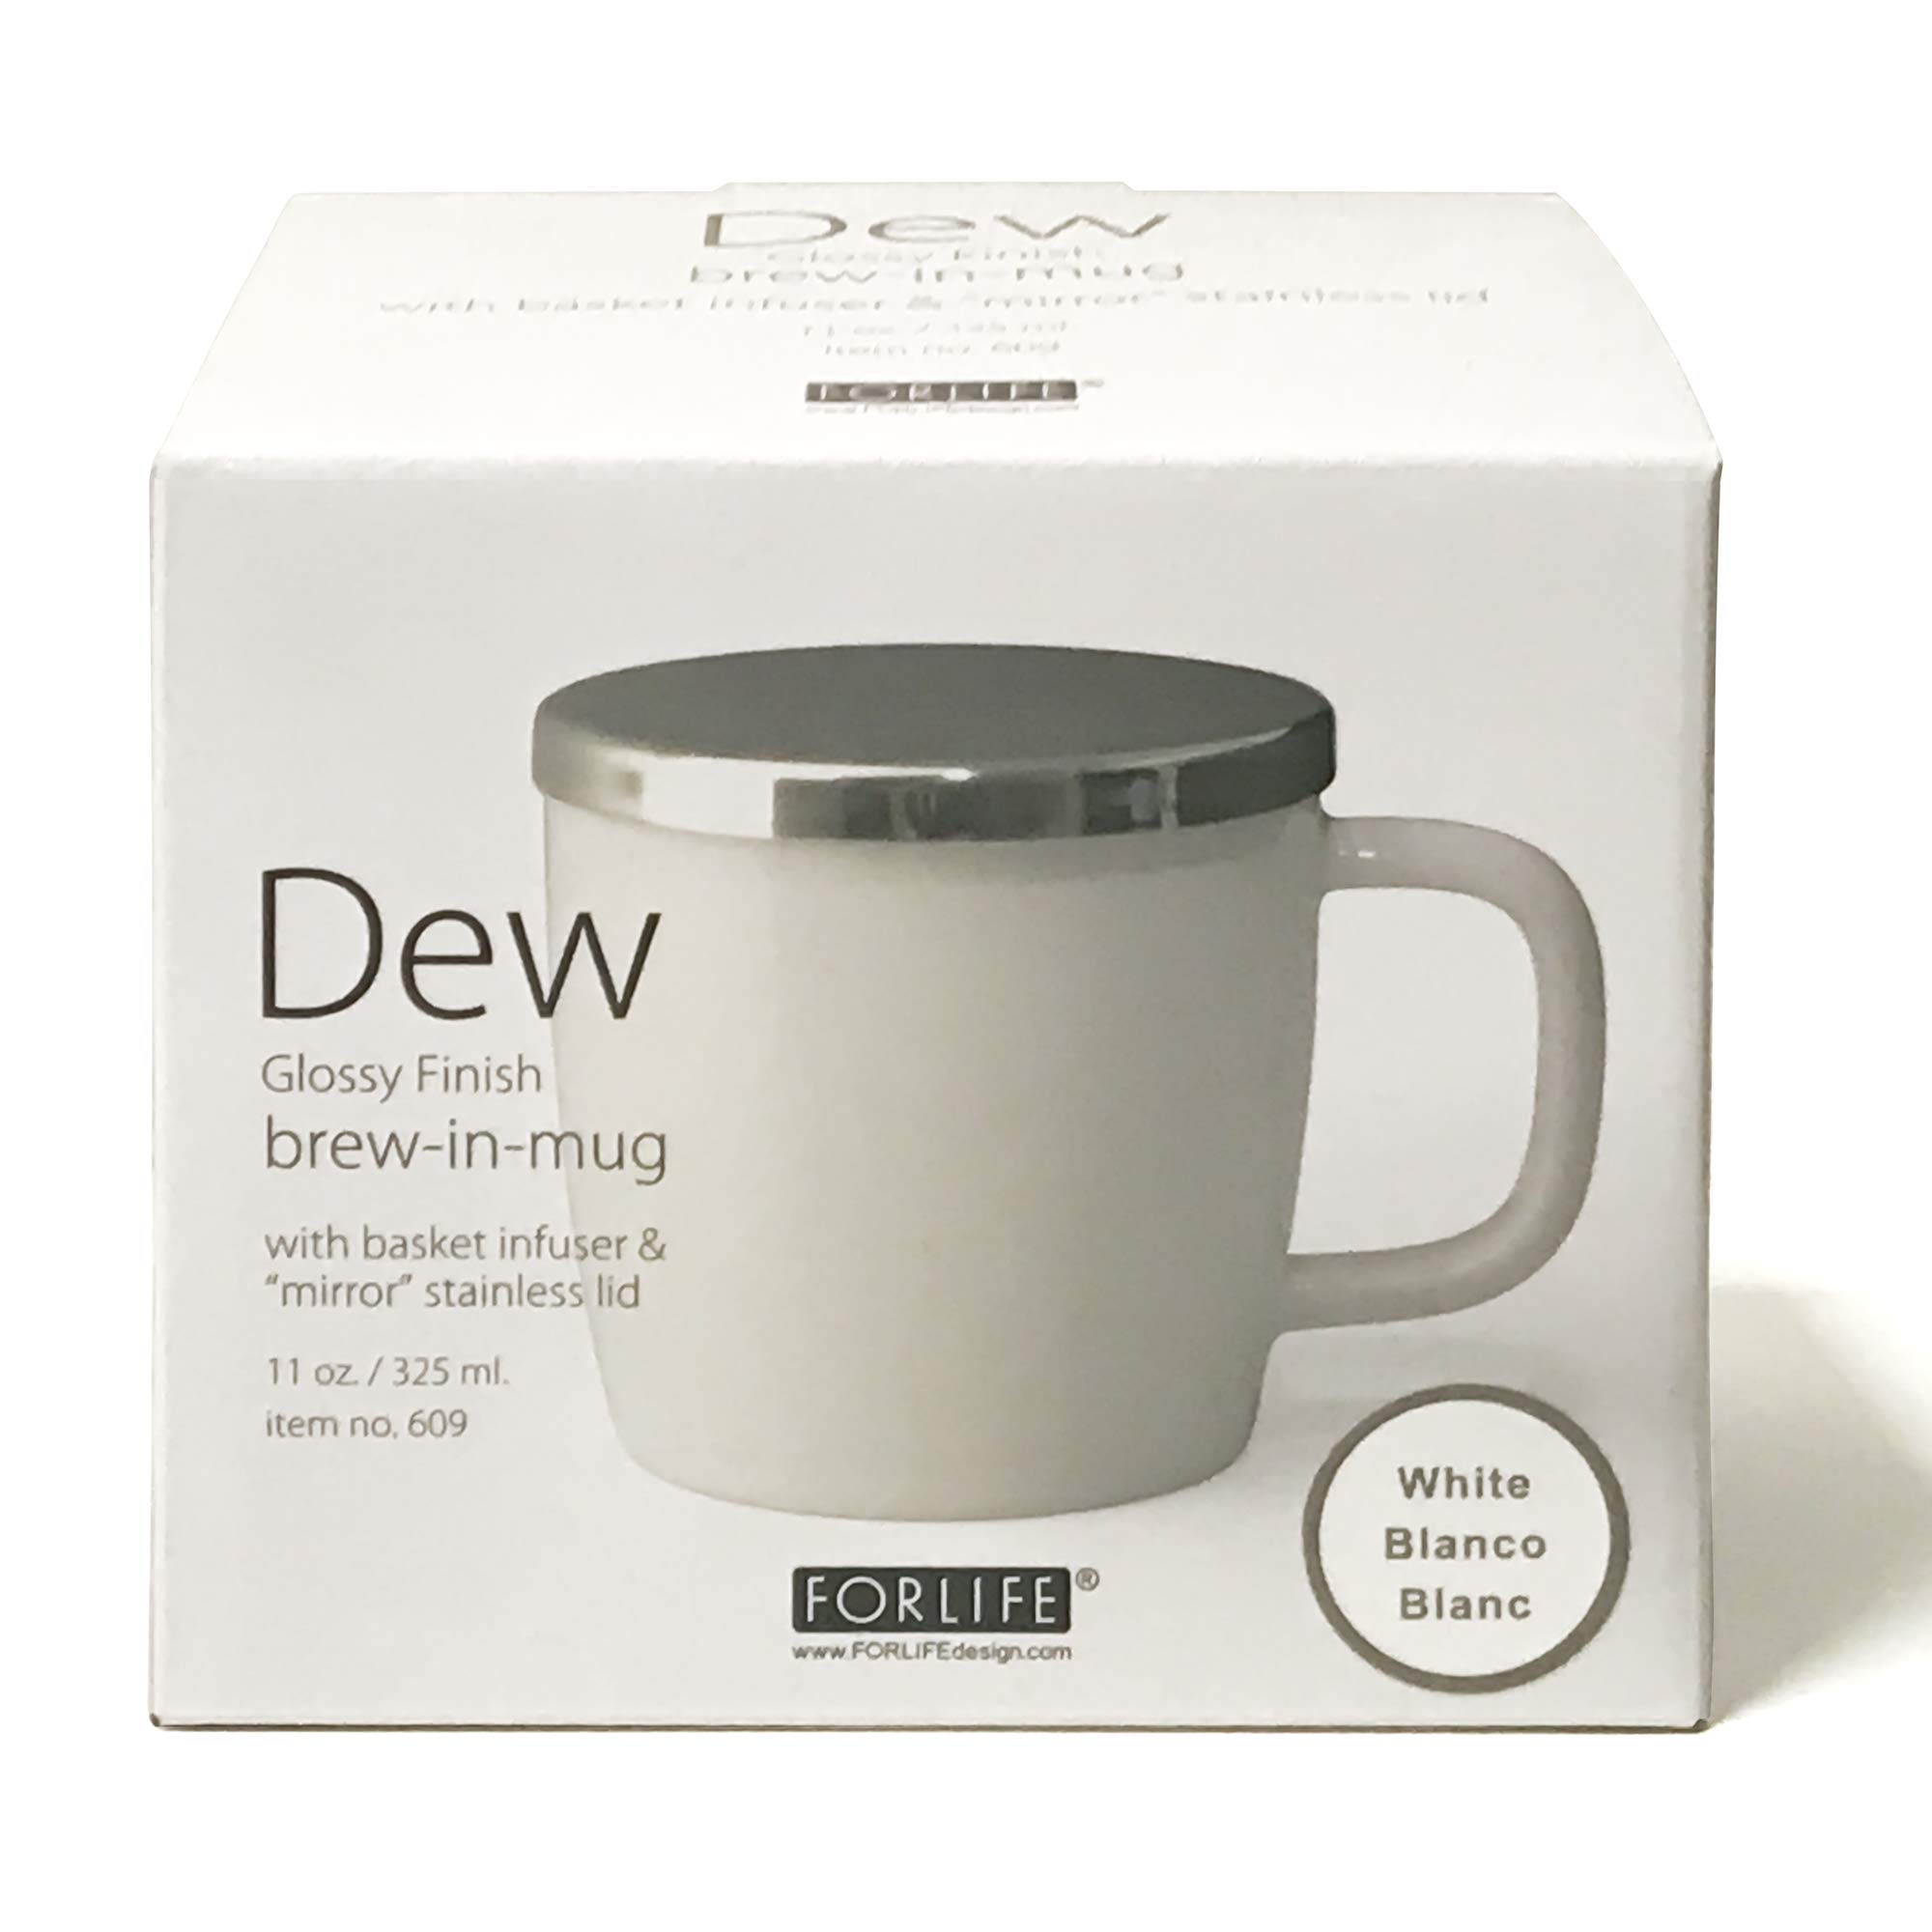 FORLIFE Dew Glossy Finish Brew-In-Mug with Basket Infuser &"Mirror" Stainless Lid 11 oz. (White)